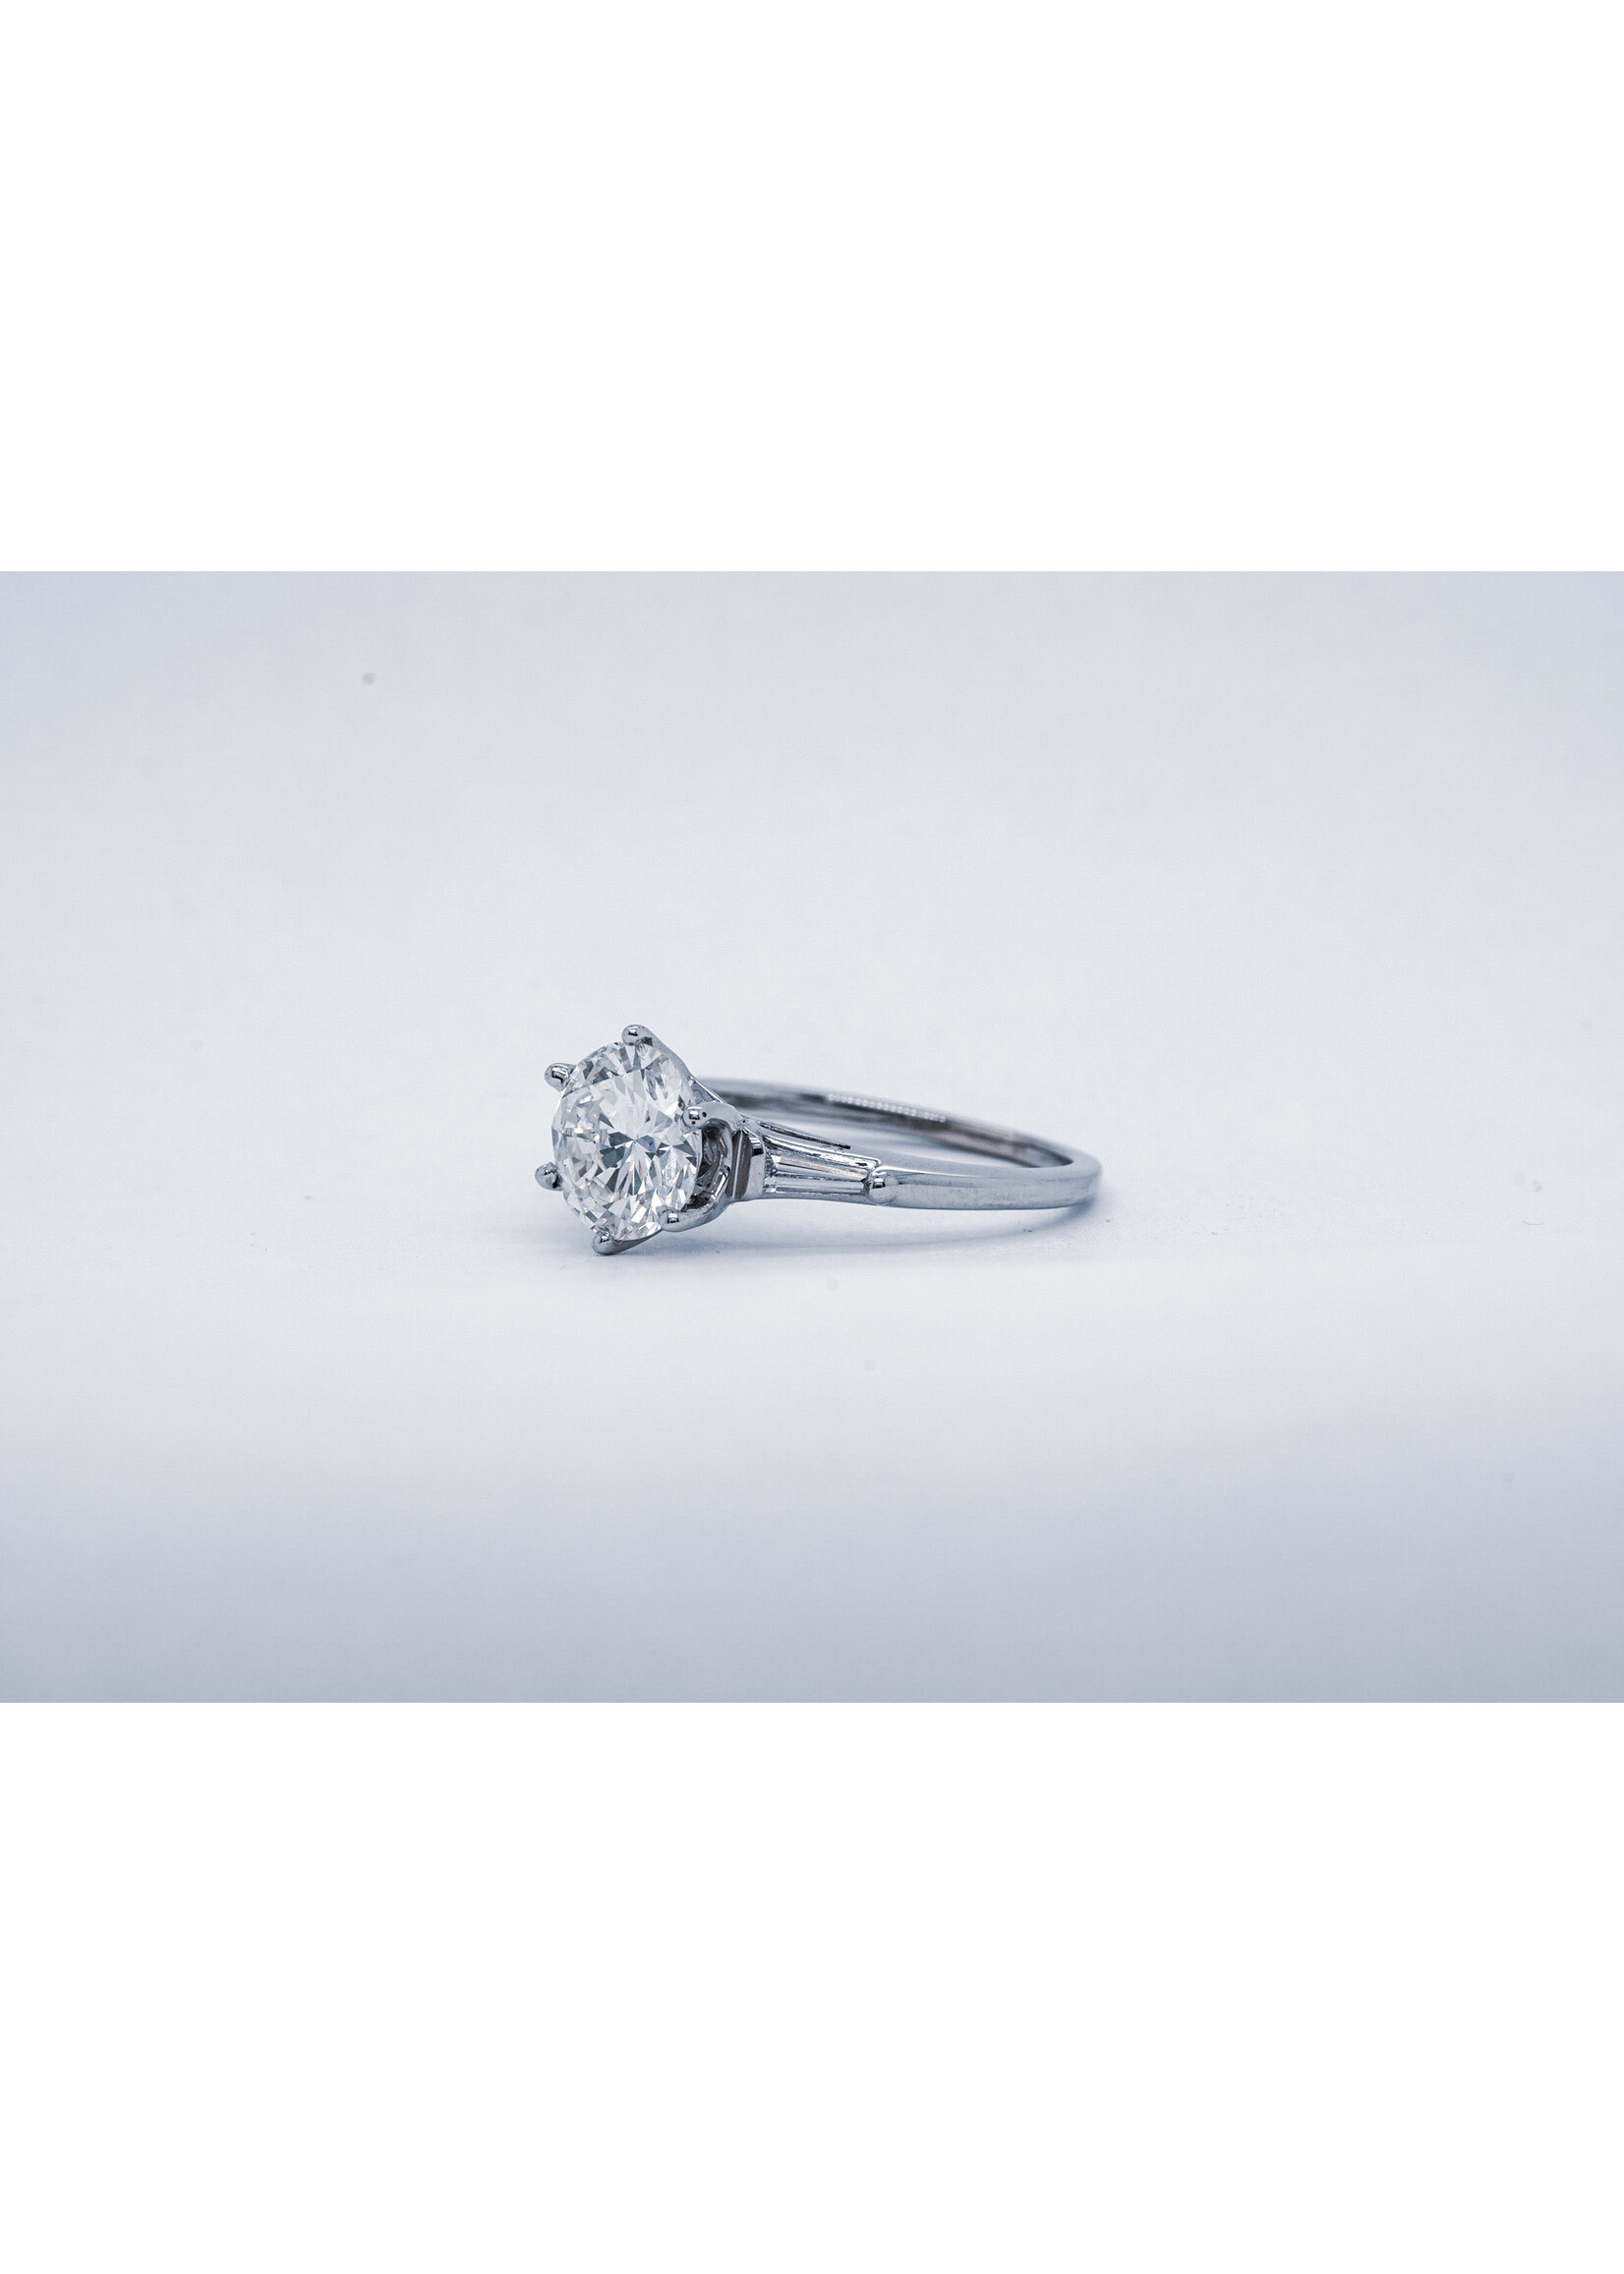 14KW 2.41g 1.81ctw (1.57ctr) I/SI1 Transitional Cut Diamond Engagement Ring (size 5.5)